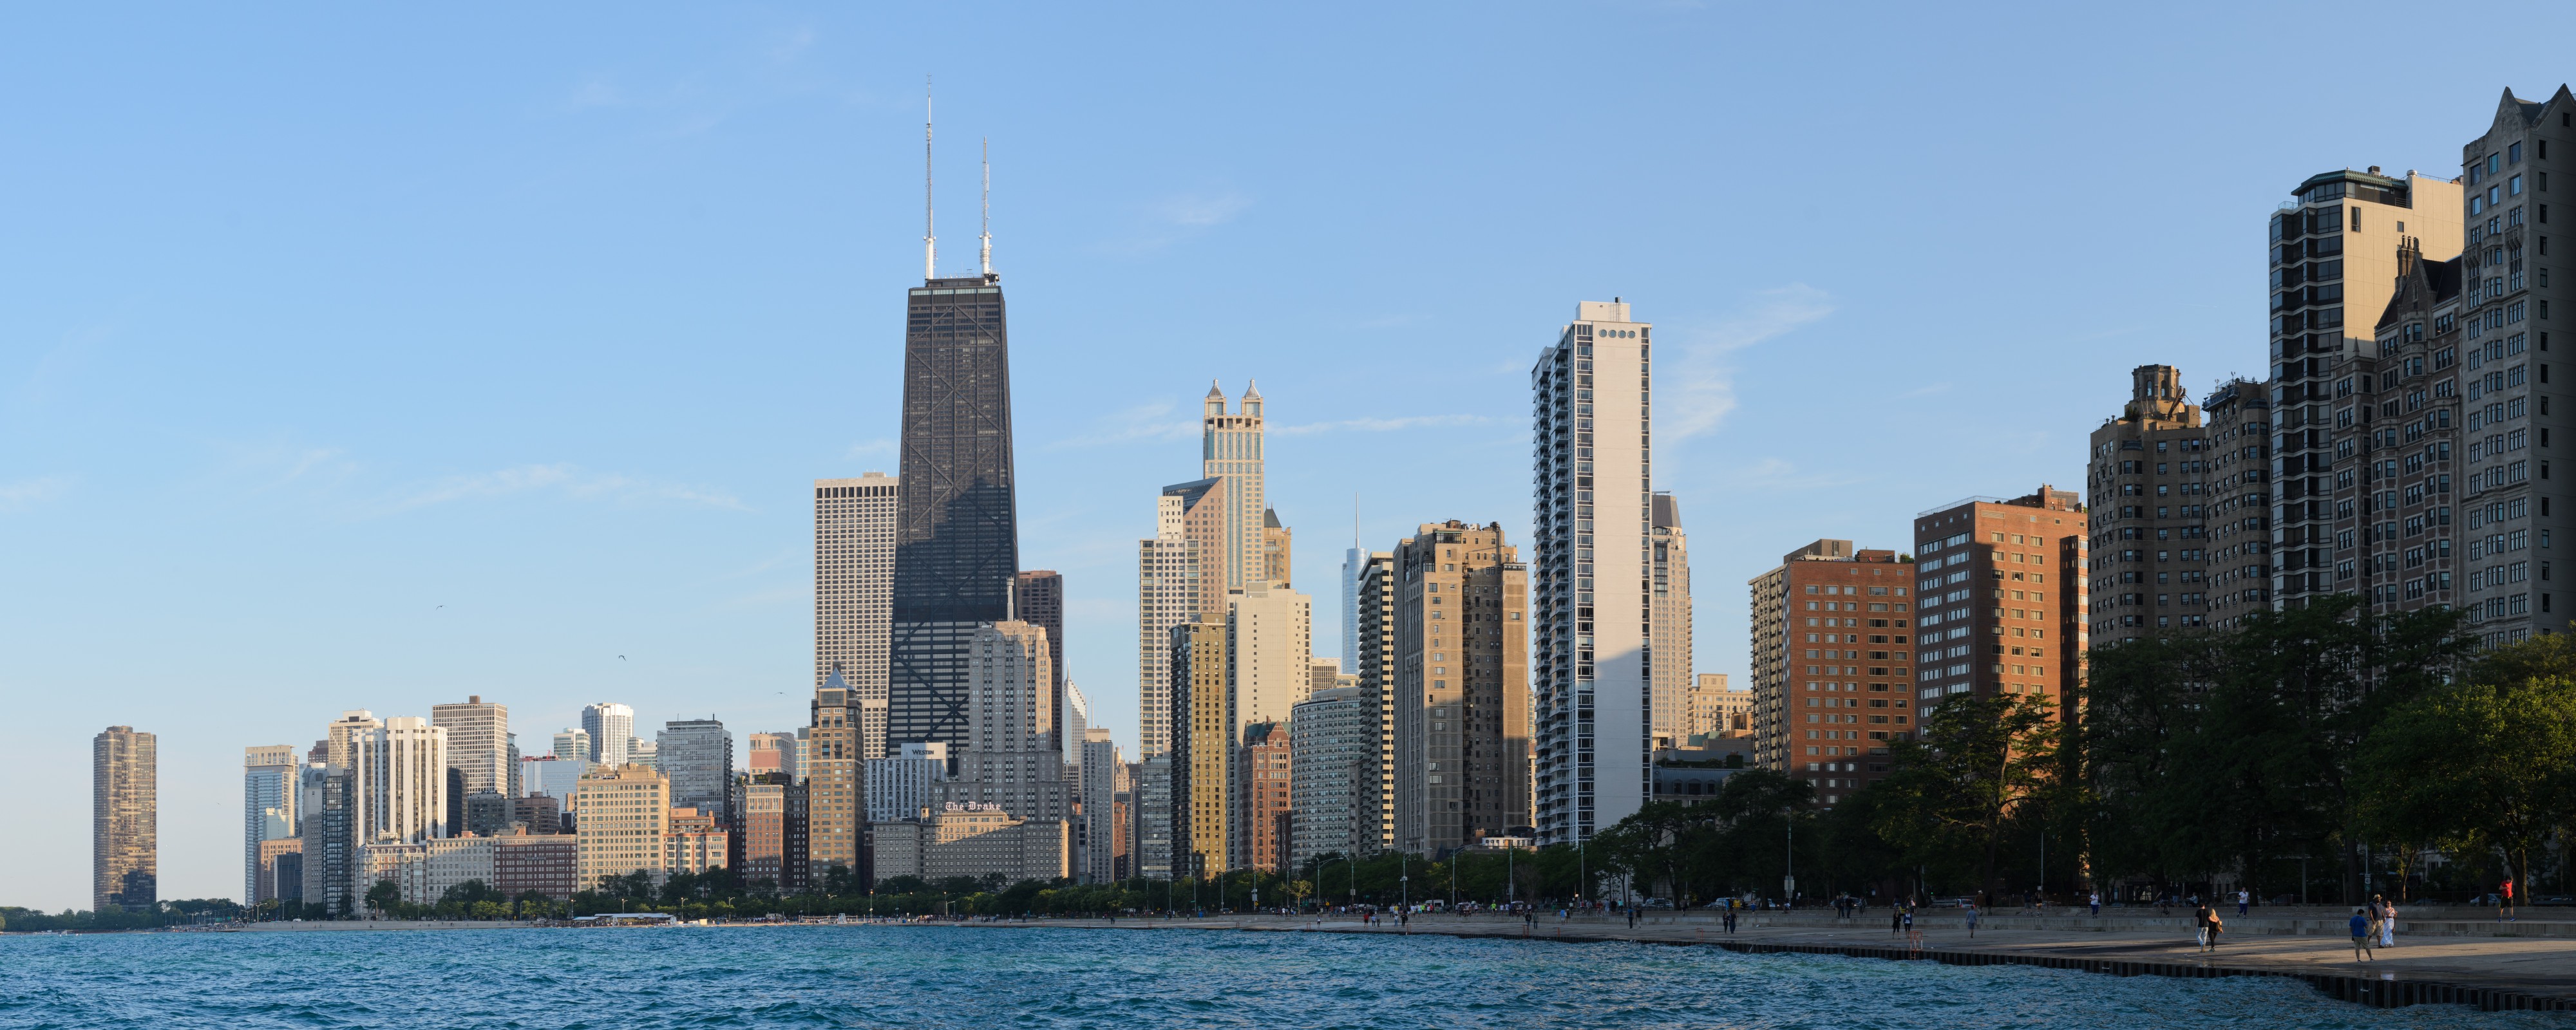 Chicago from North Avenue Beach June 2015 panorama 1